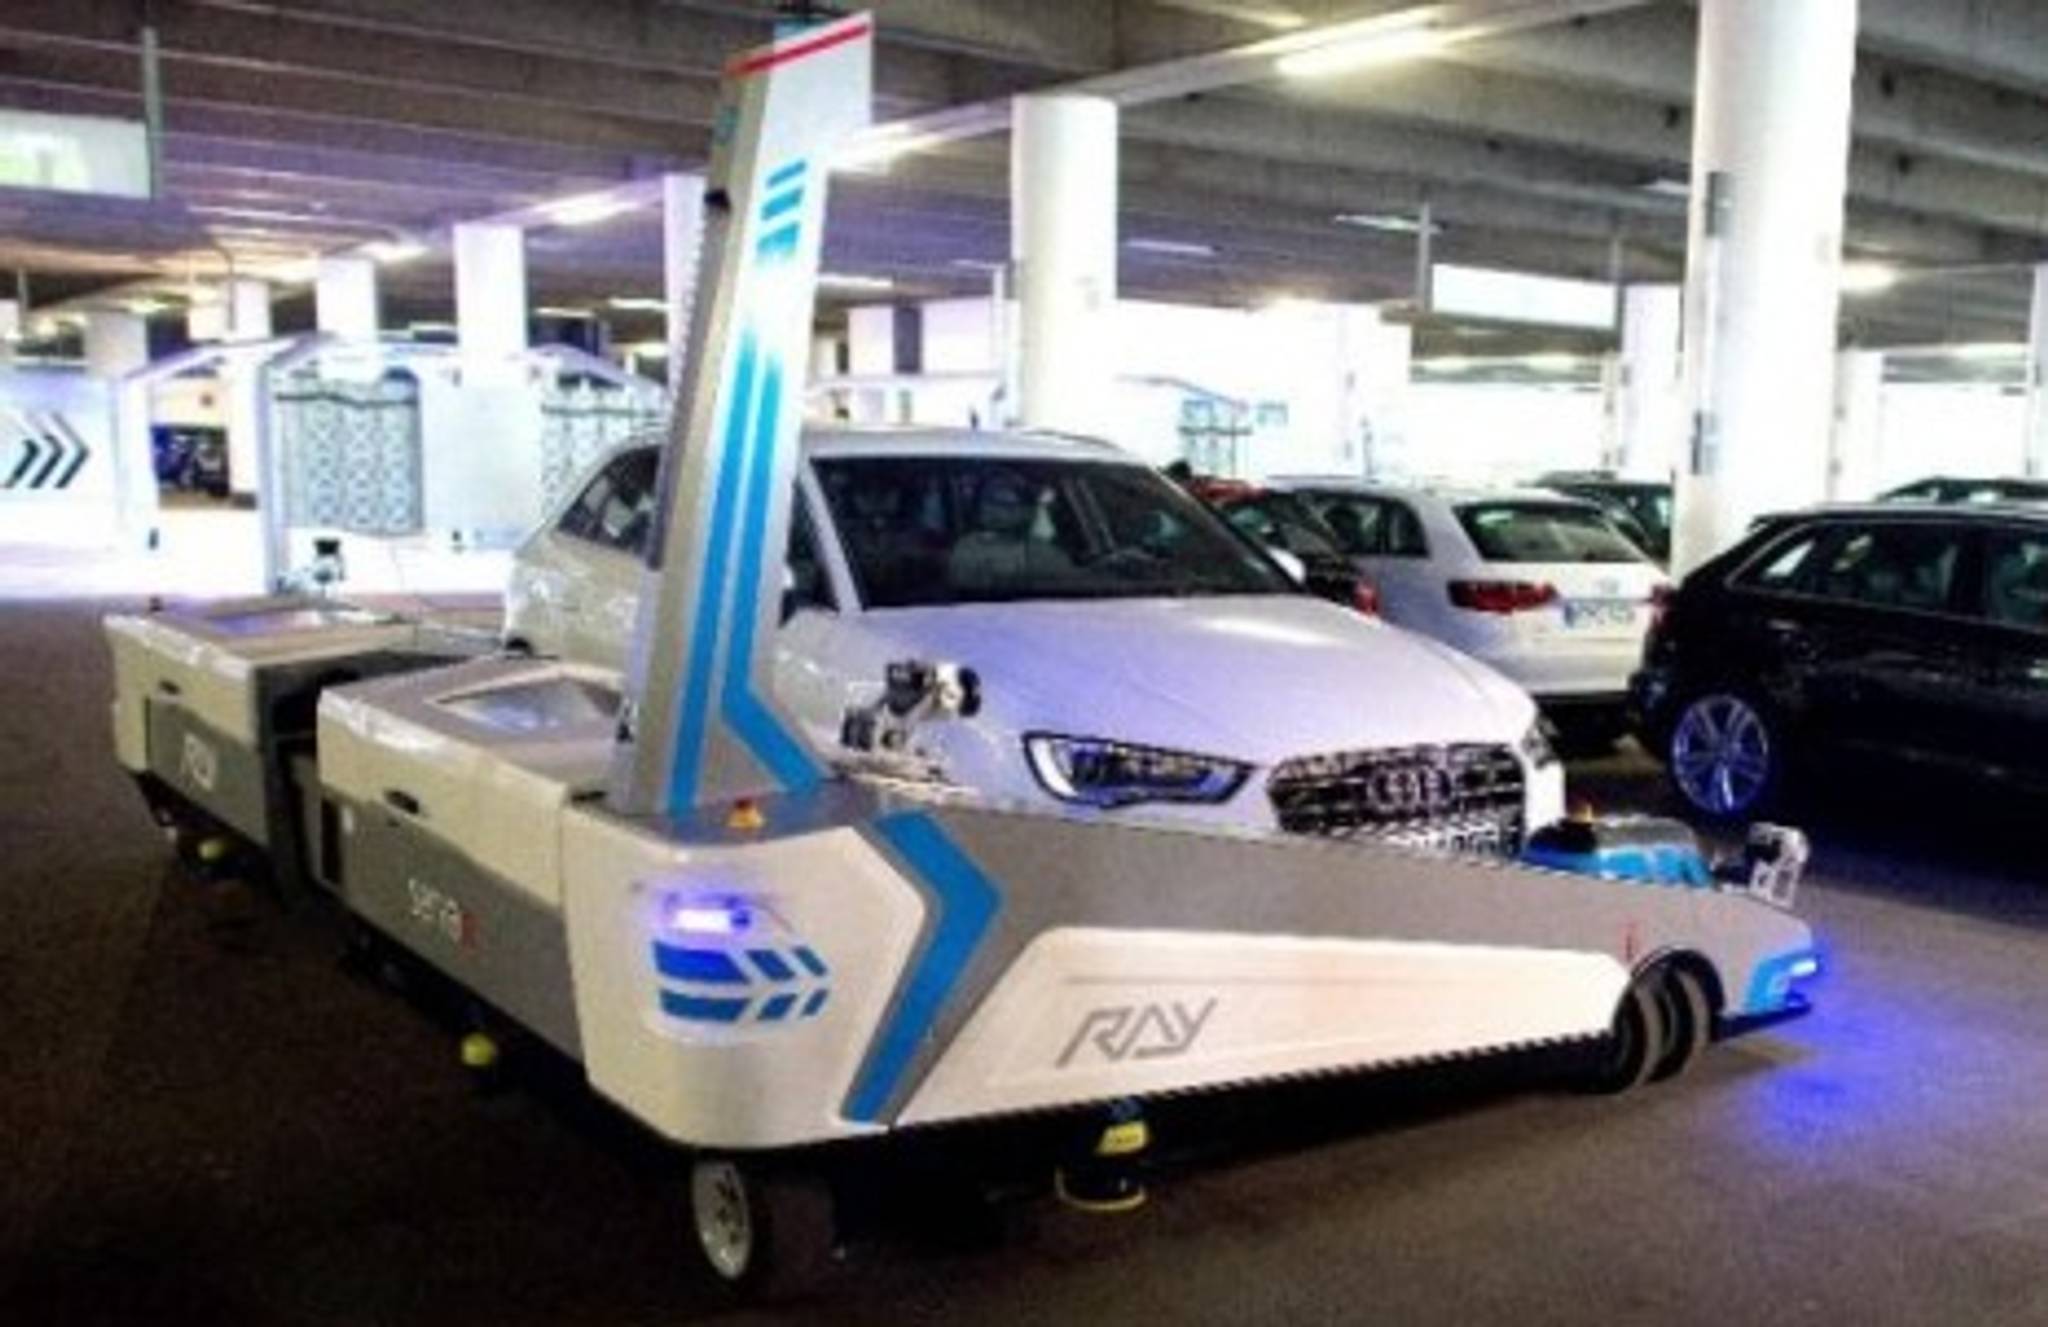 Robots will park your car in Germany